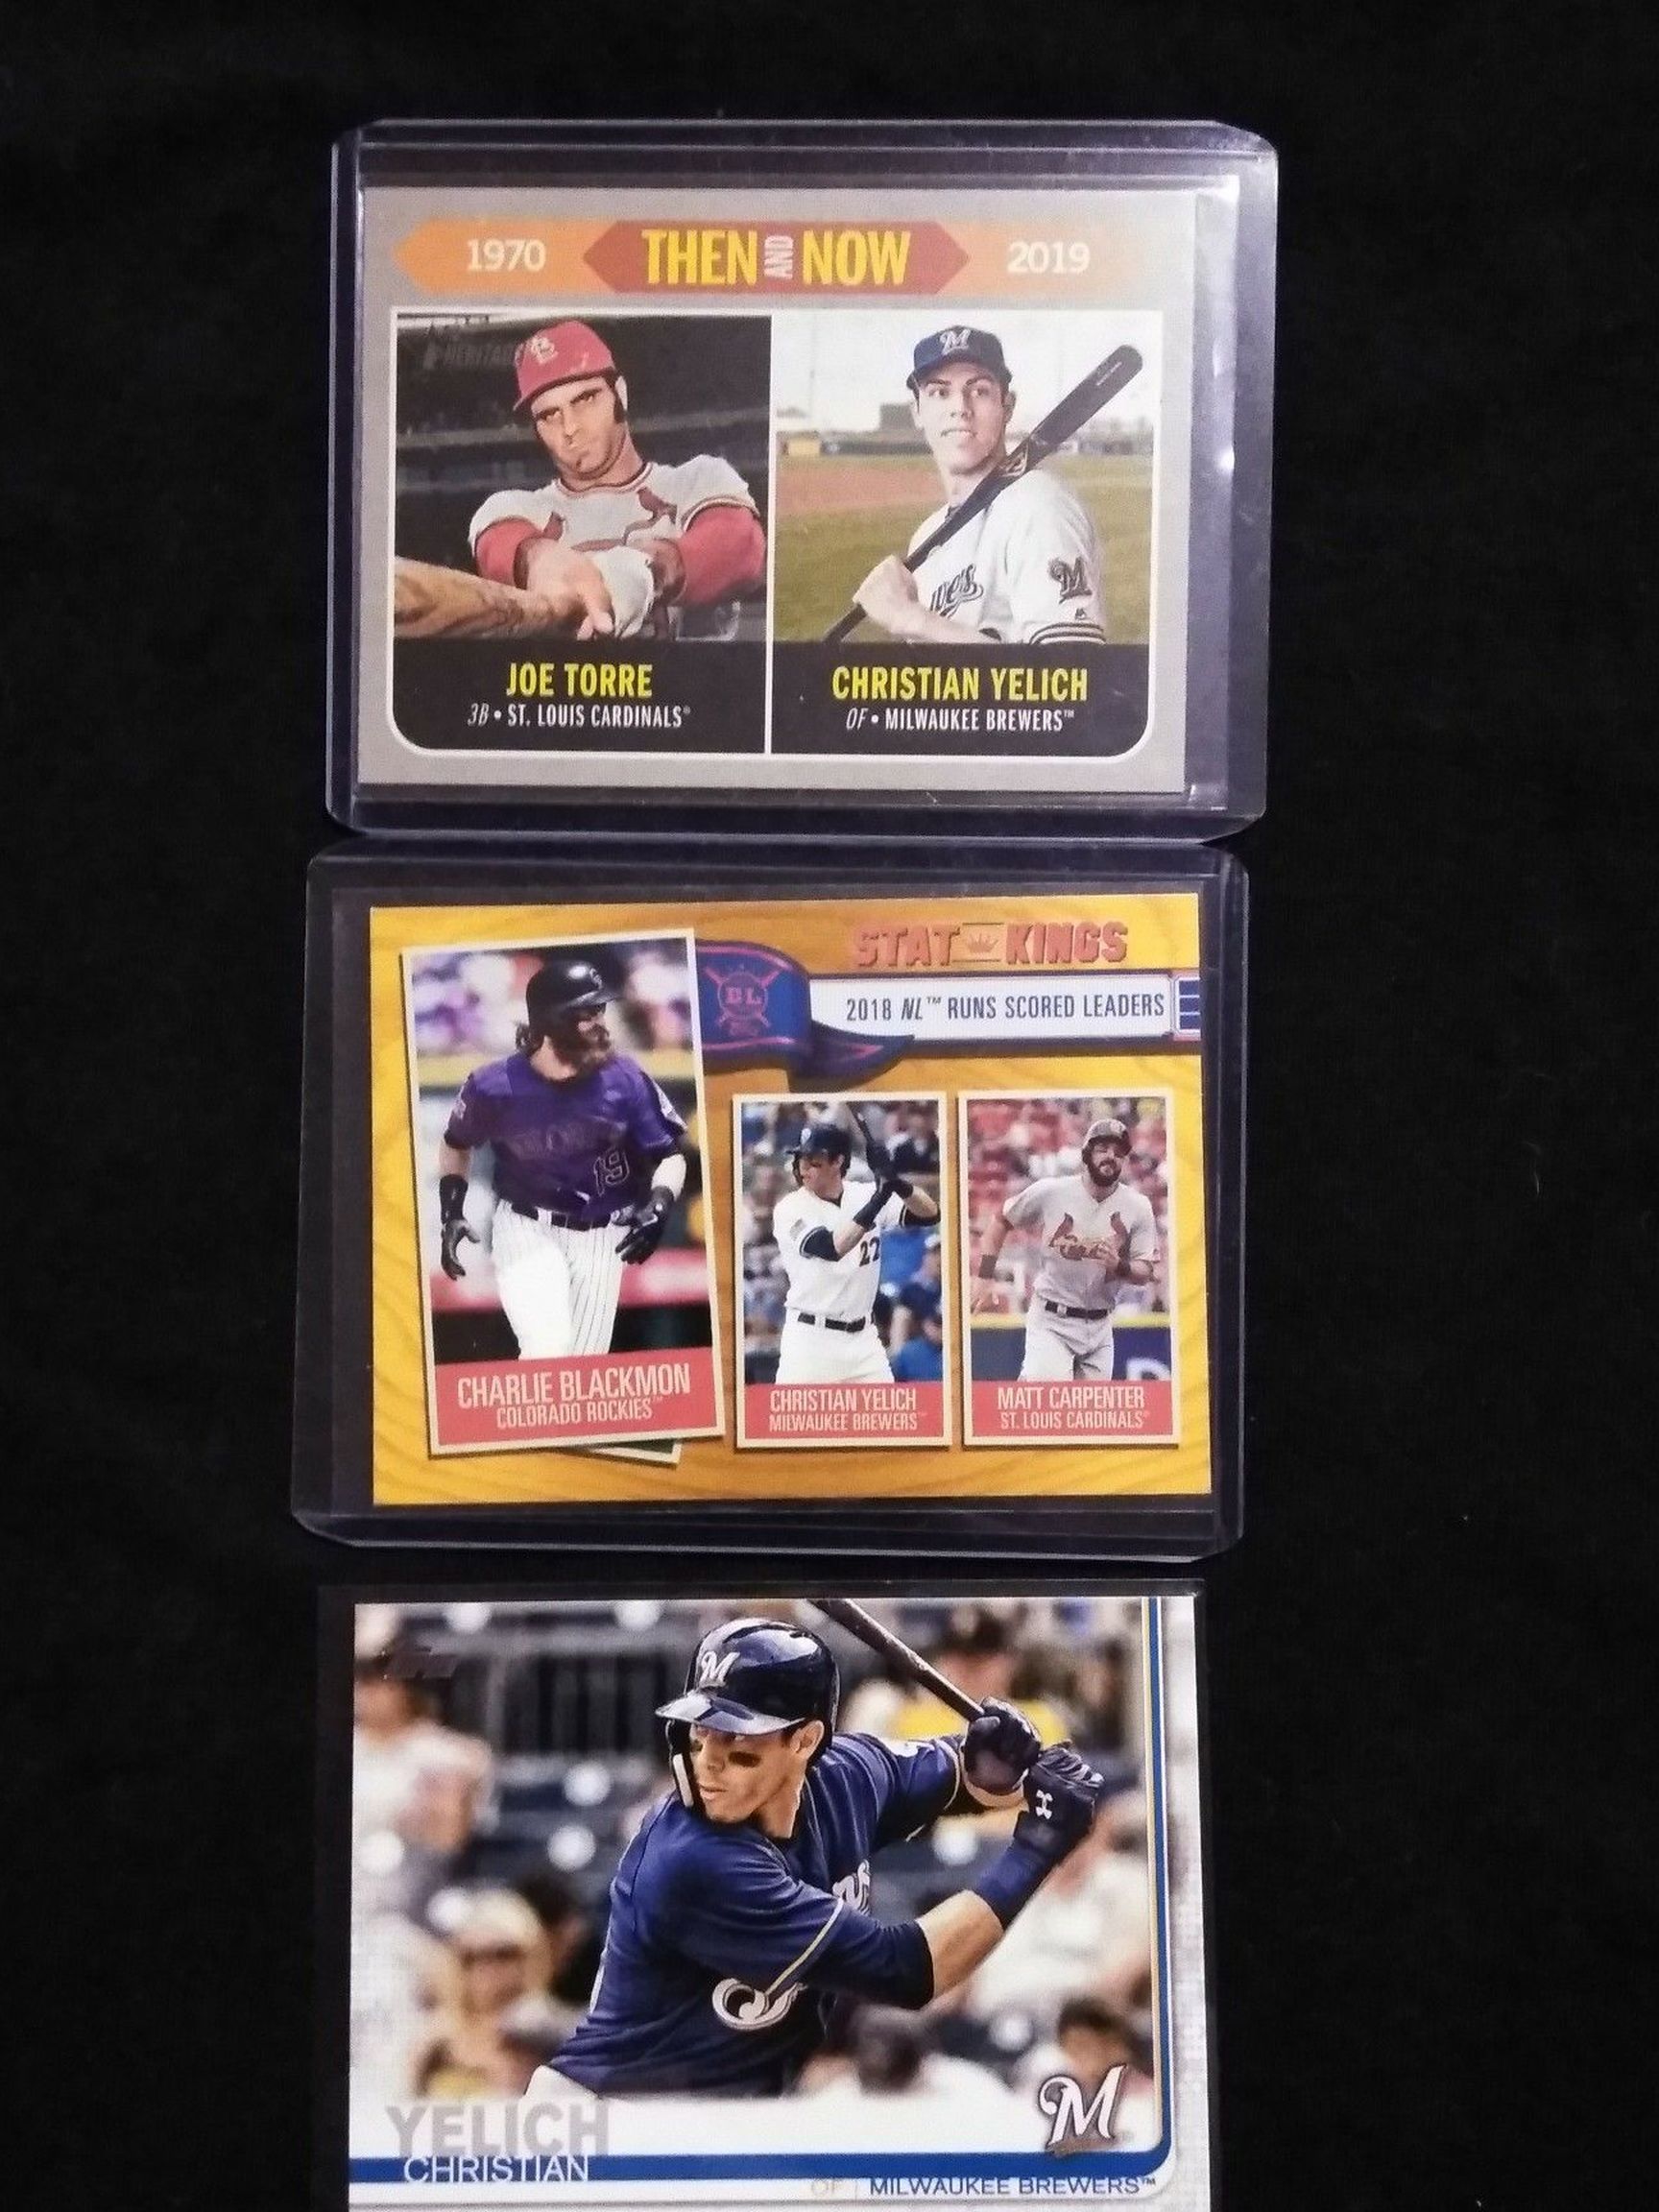 Christian Yelich Baseball Card Collection.